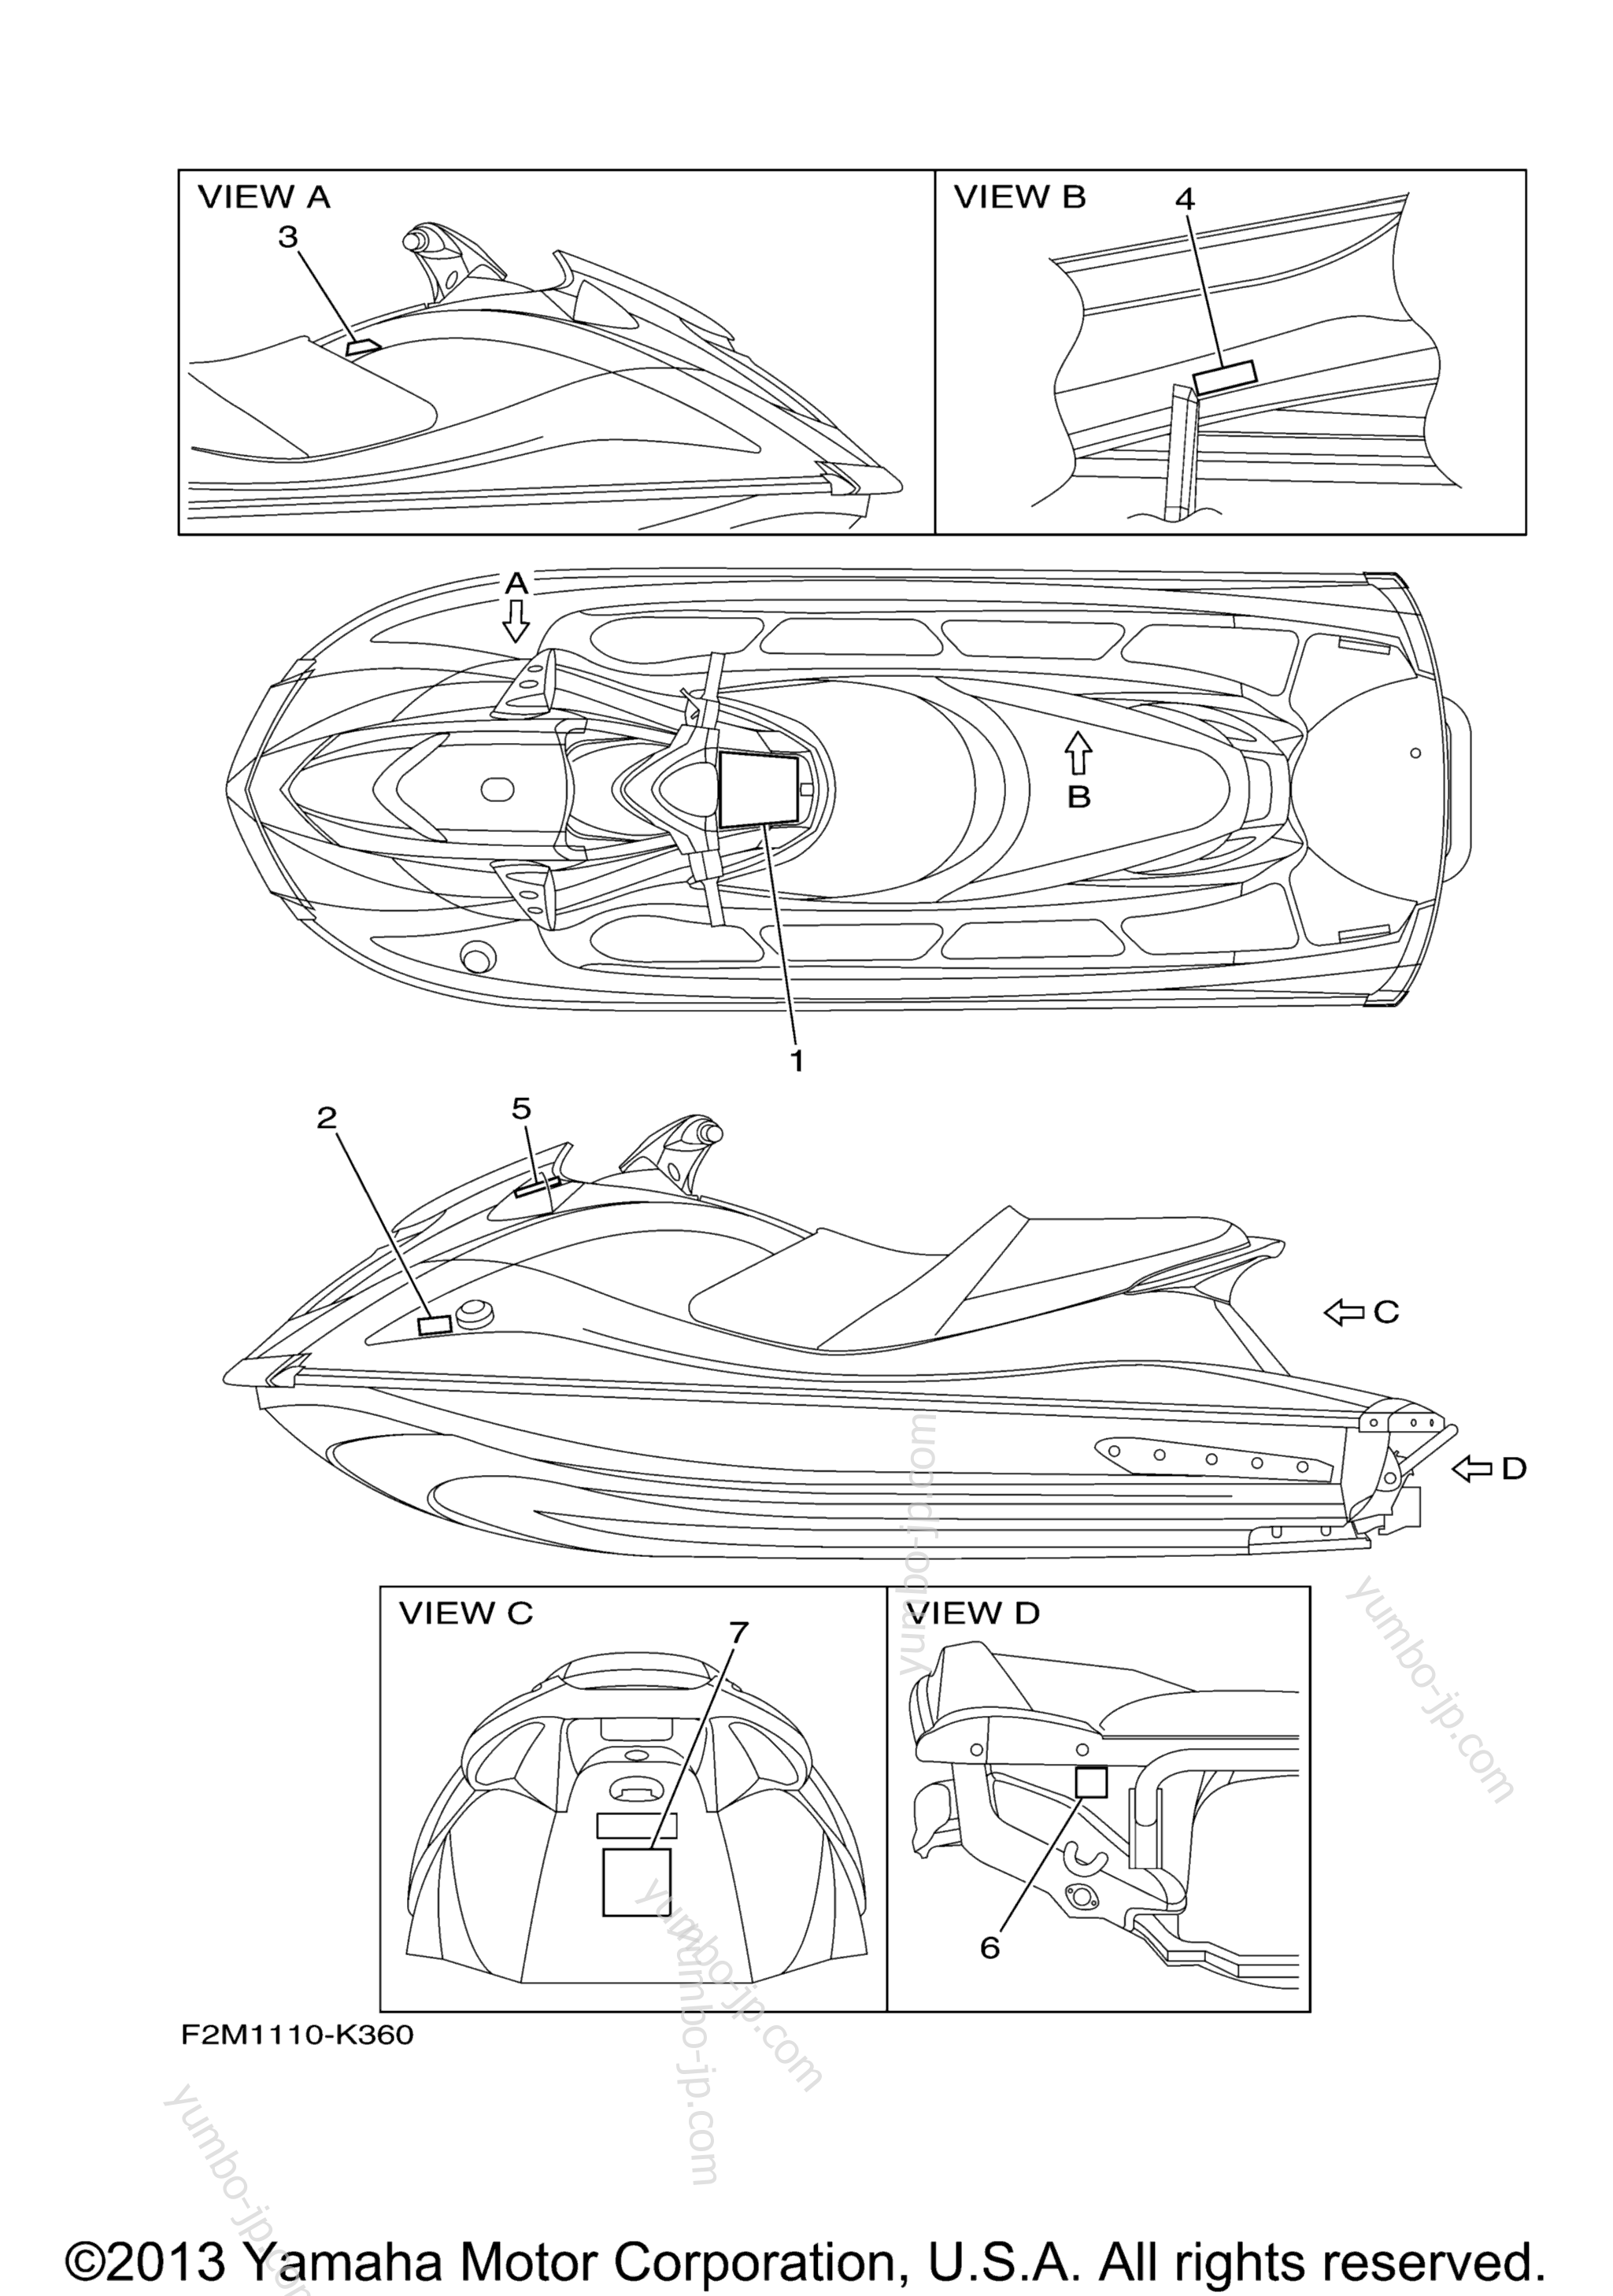 Important Labels for watercrafts YAMAHA VXR (VX1800AN) 2014 year